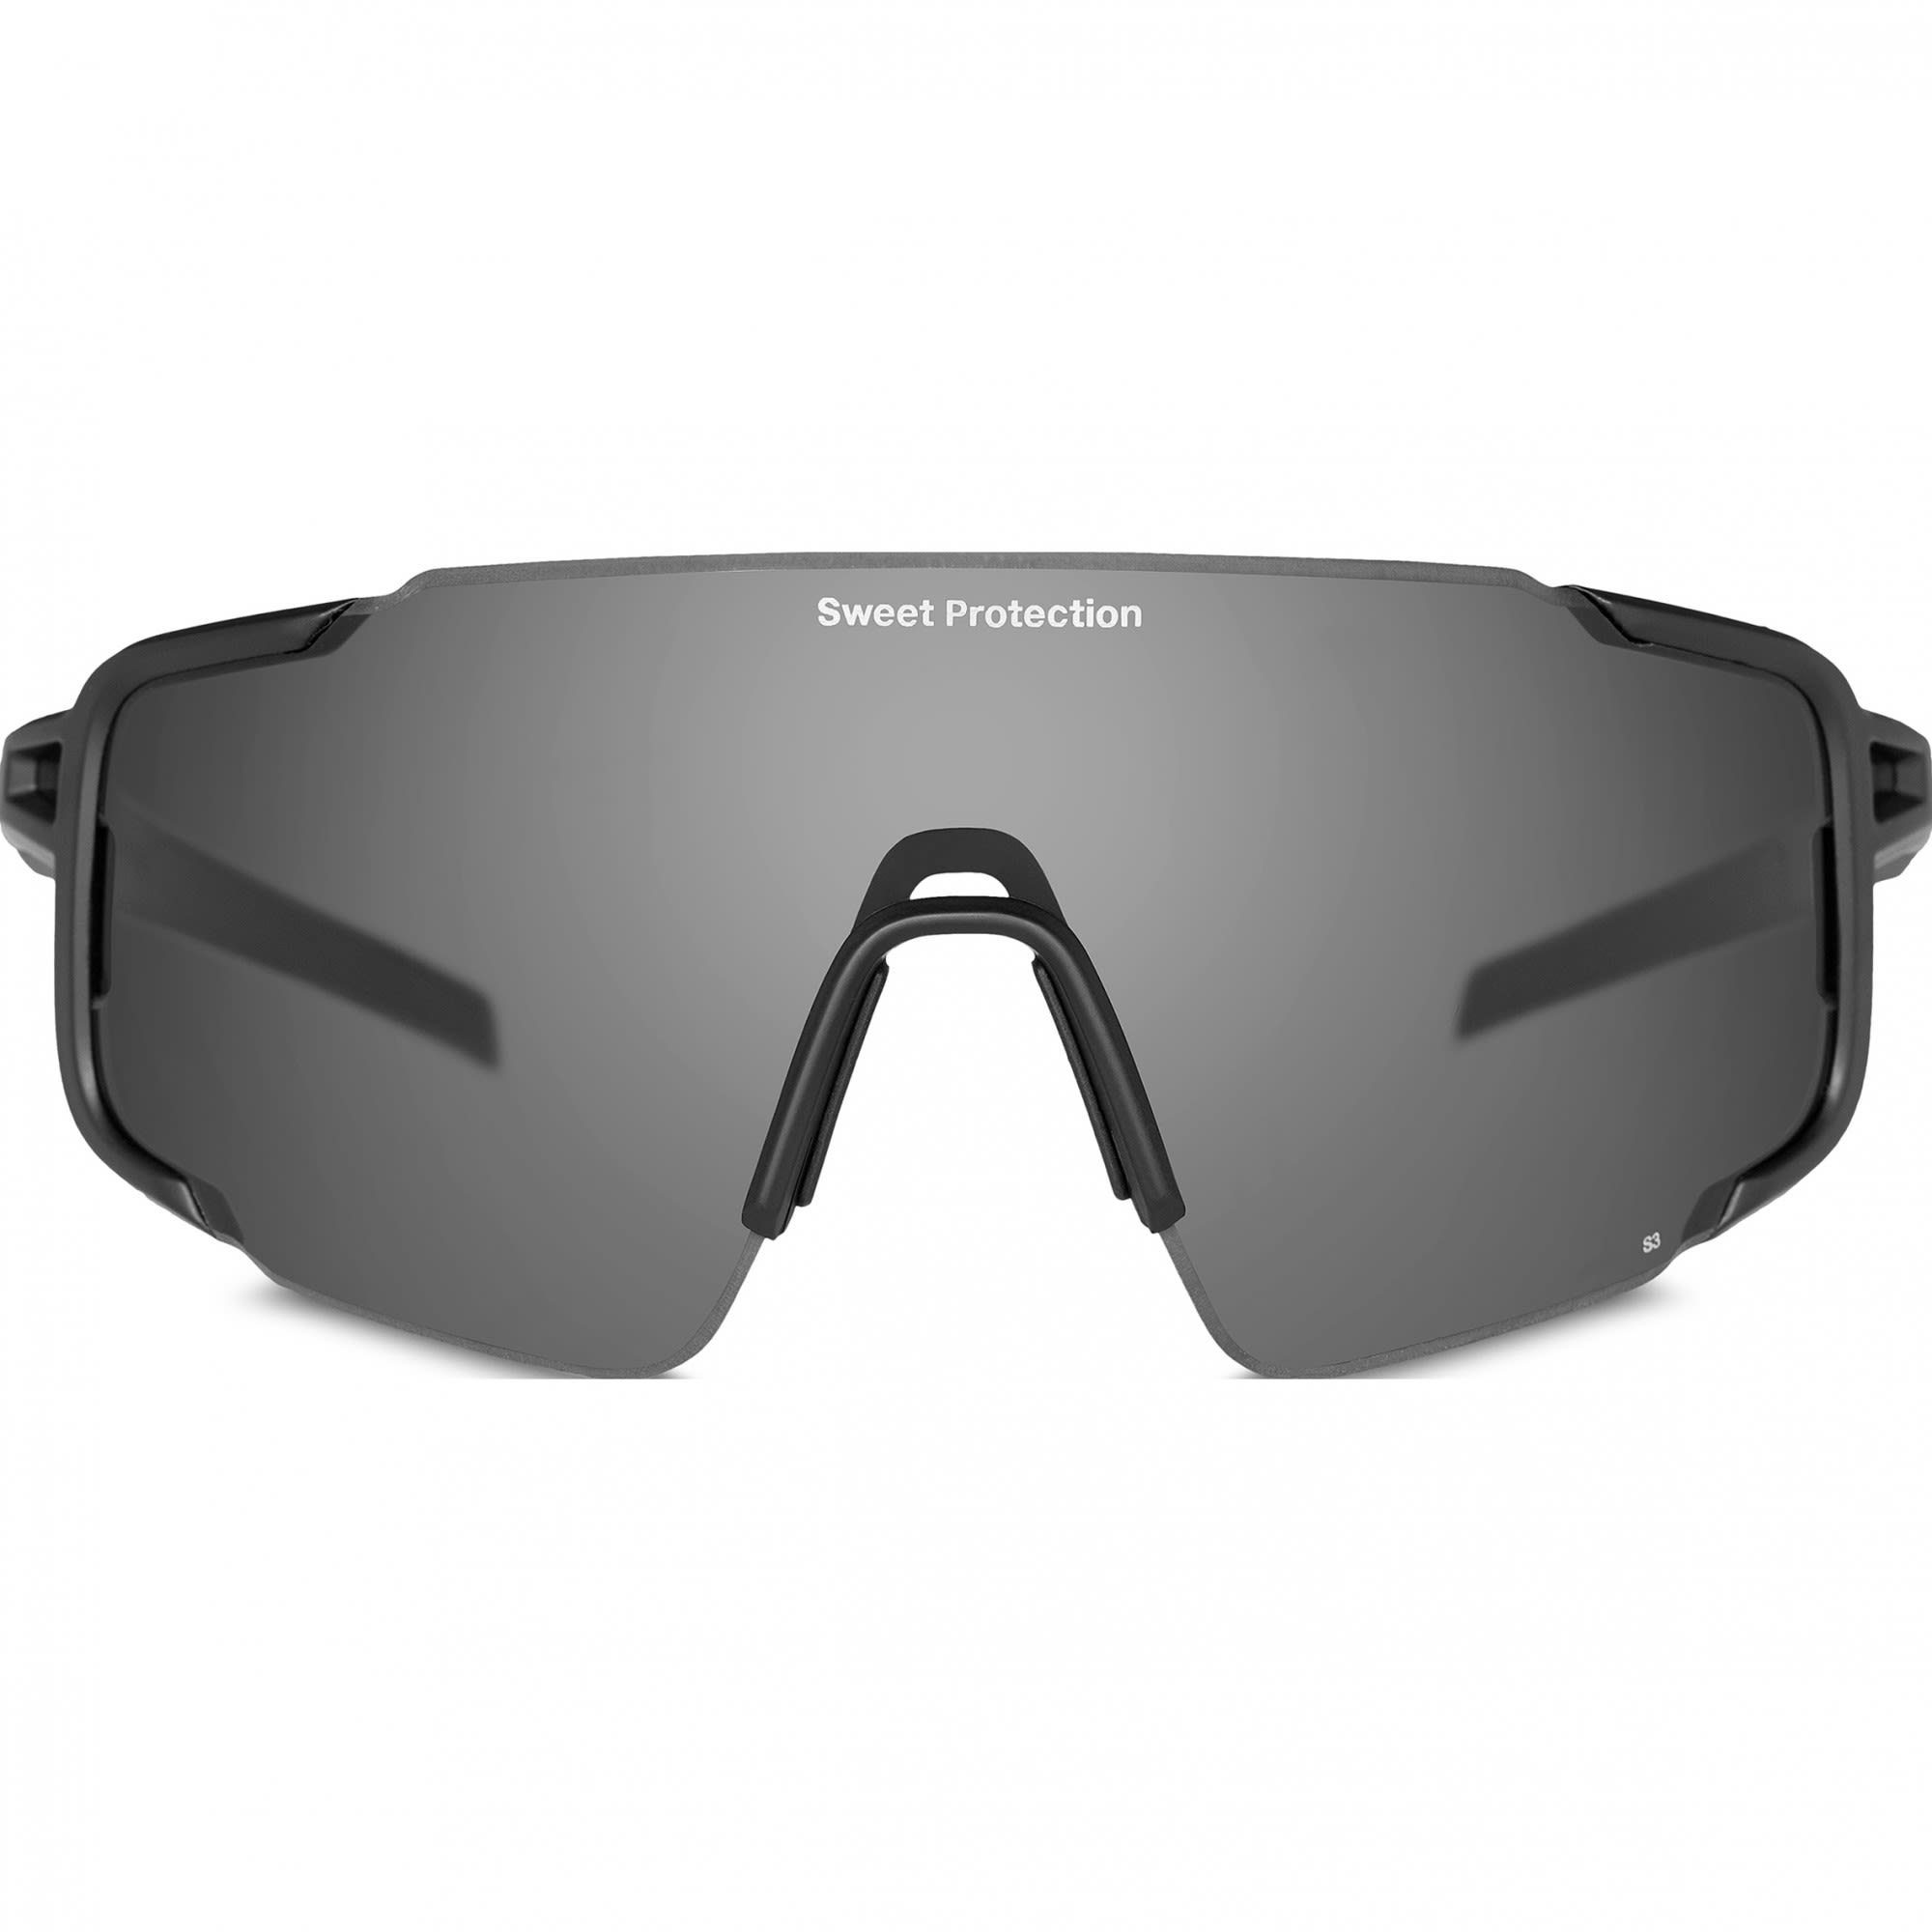 Sweet Protection Fahrradbrille Sweet Protection Polarized Max Accessoires Ronin